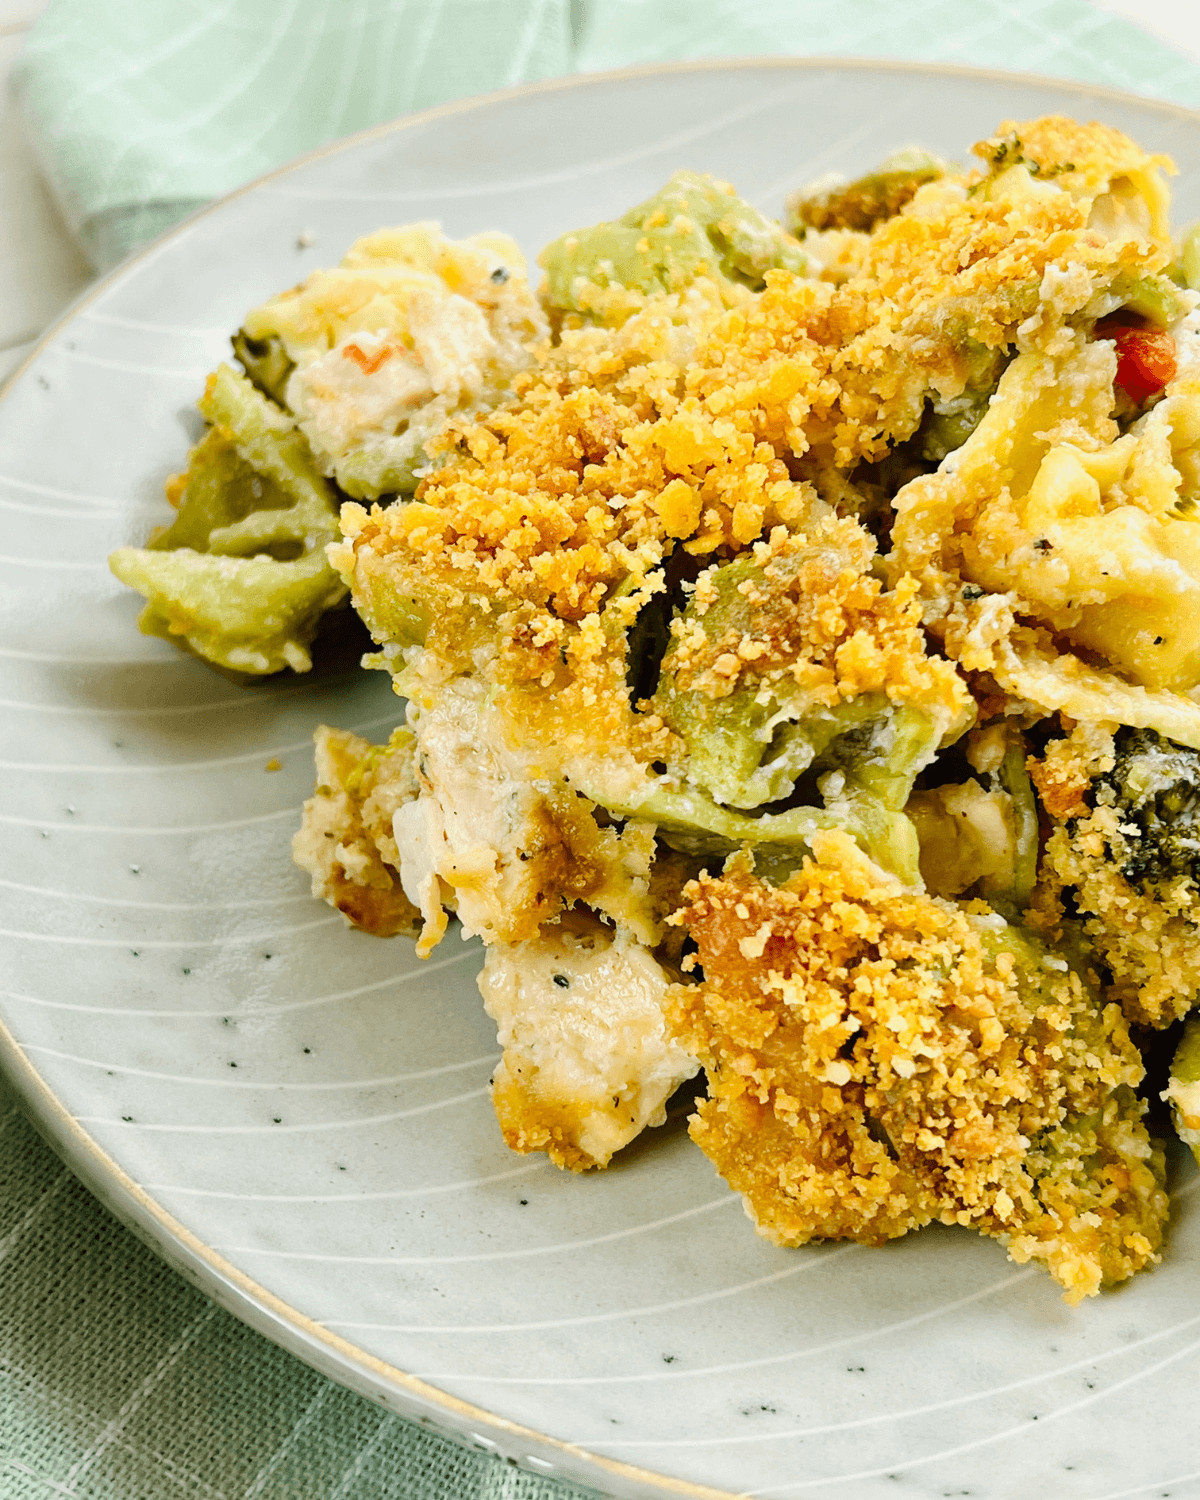 A white plate with a helping of the chicken and cheese tortellini bake.